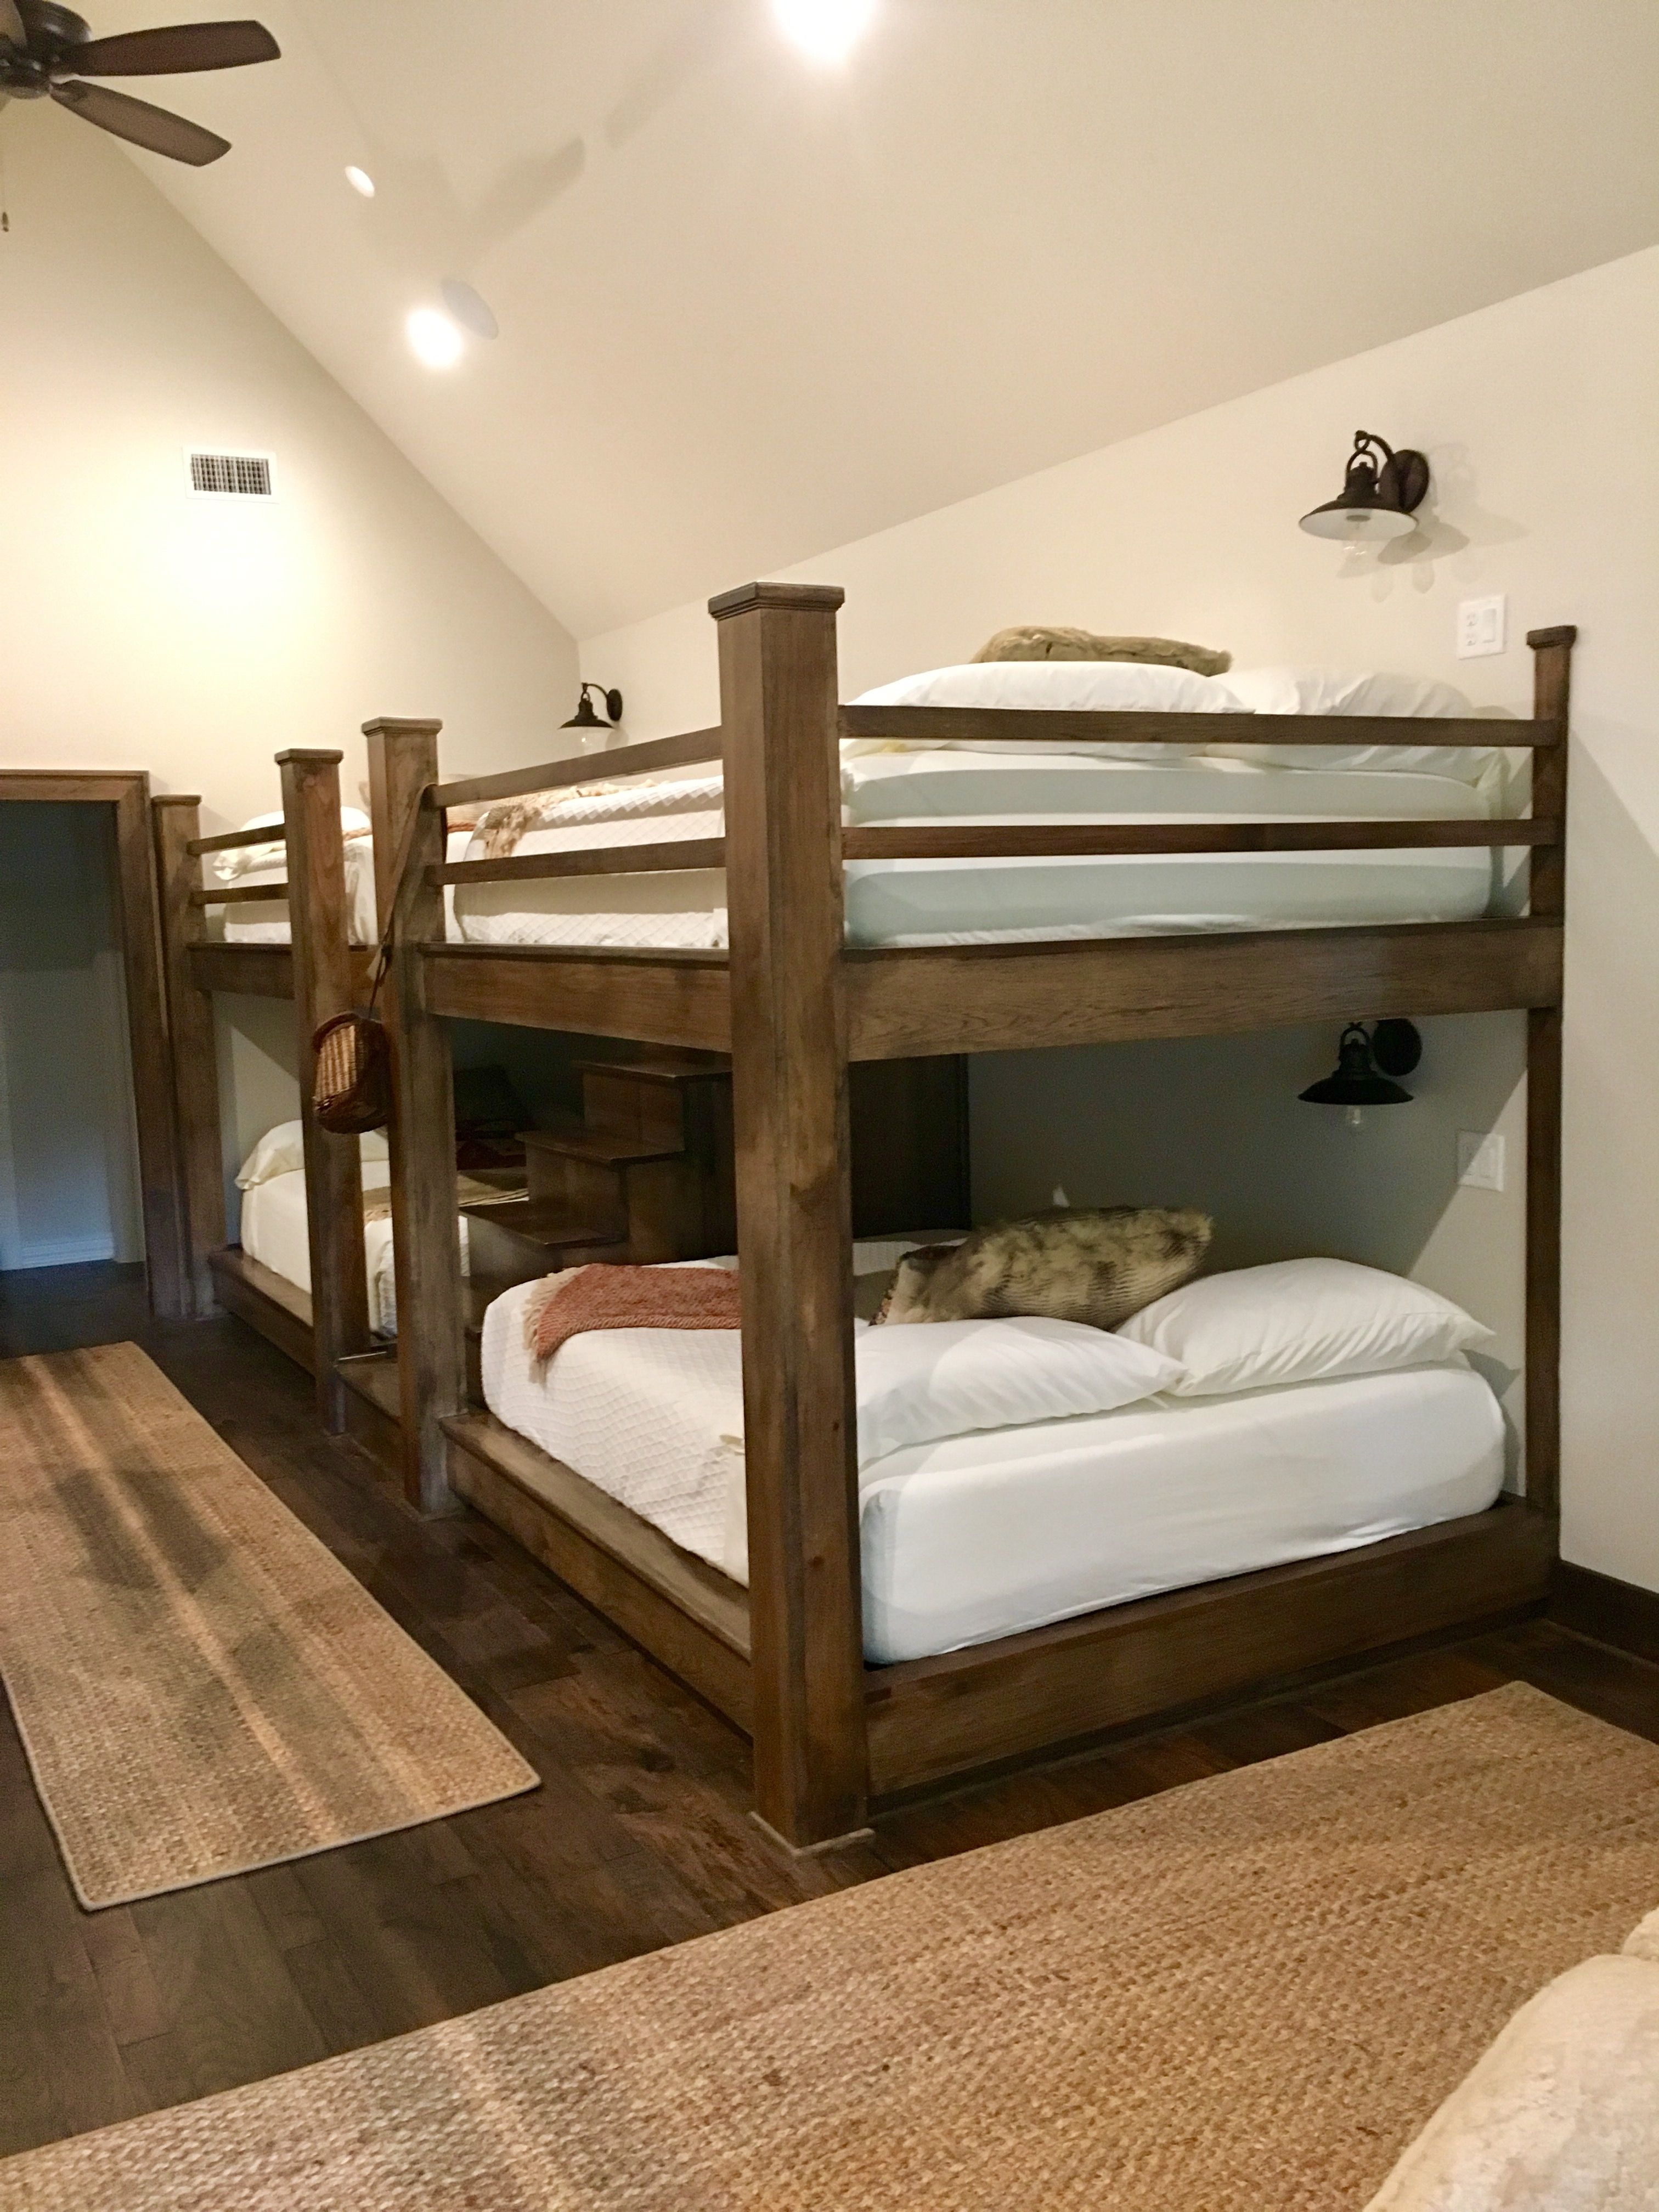 Buy Custom Quad Queen Over Queen Bunk Beds Made To Order From Longhorn 